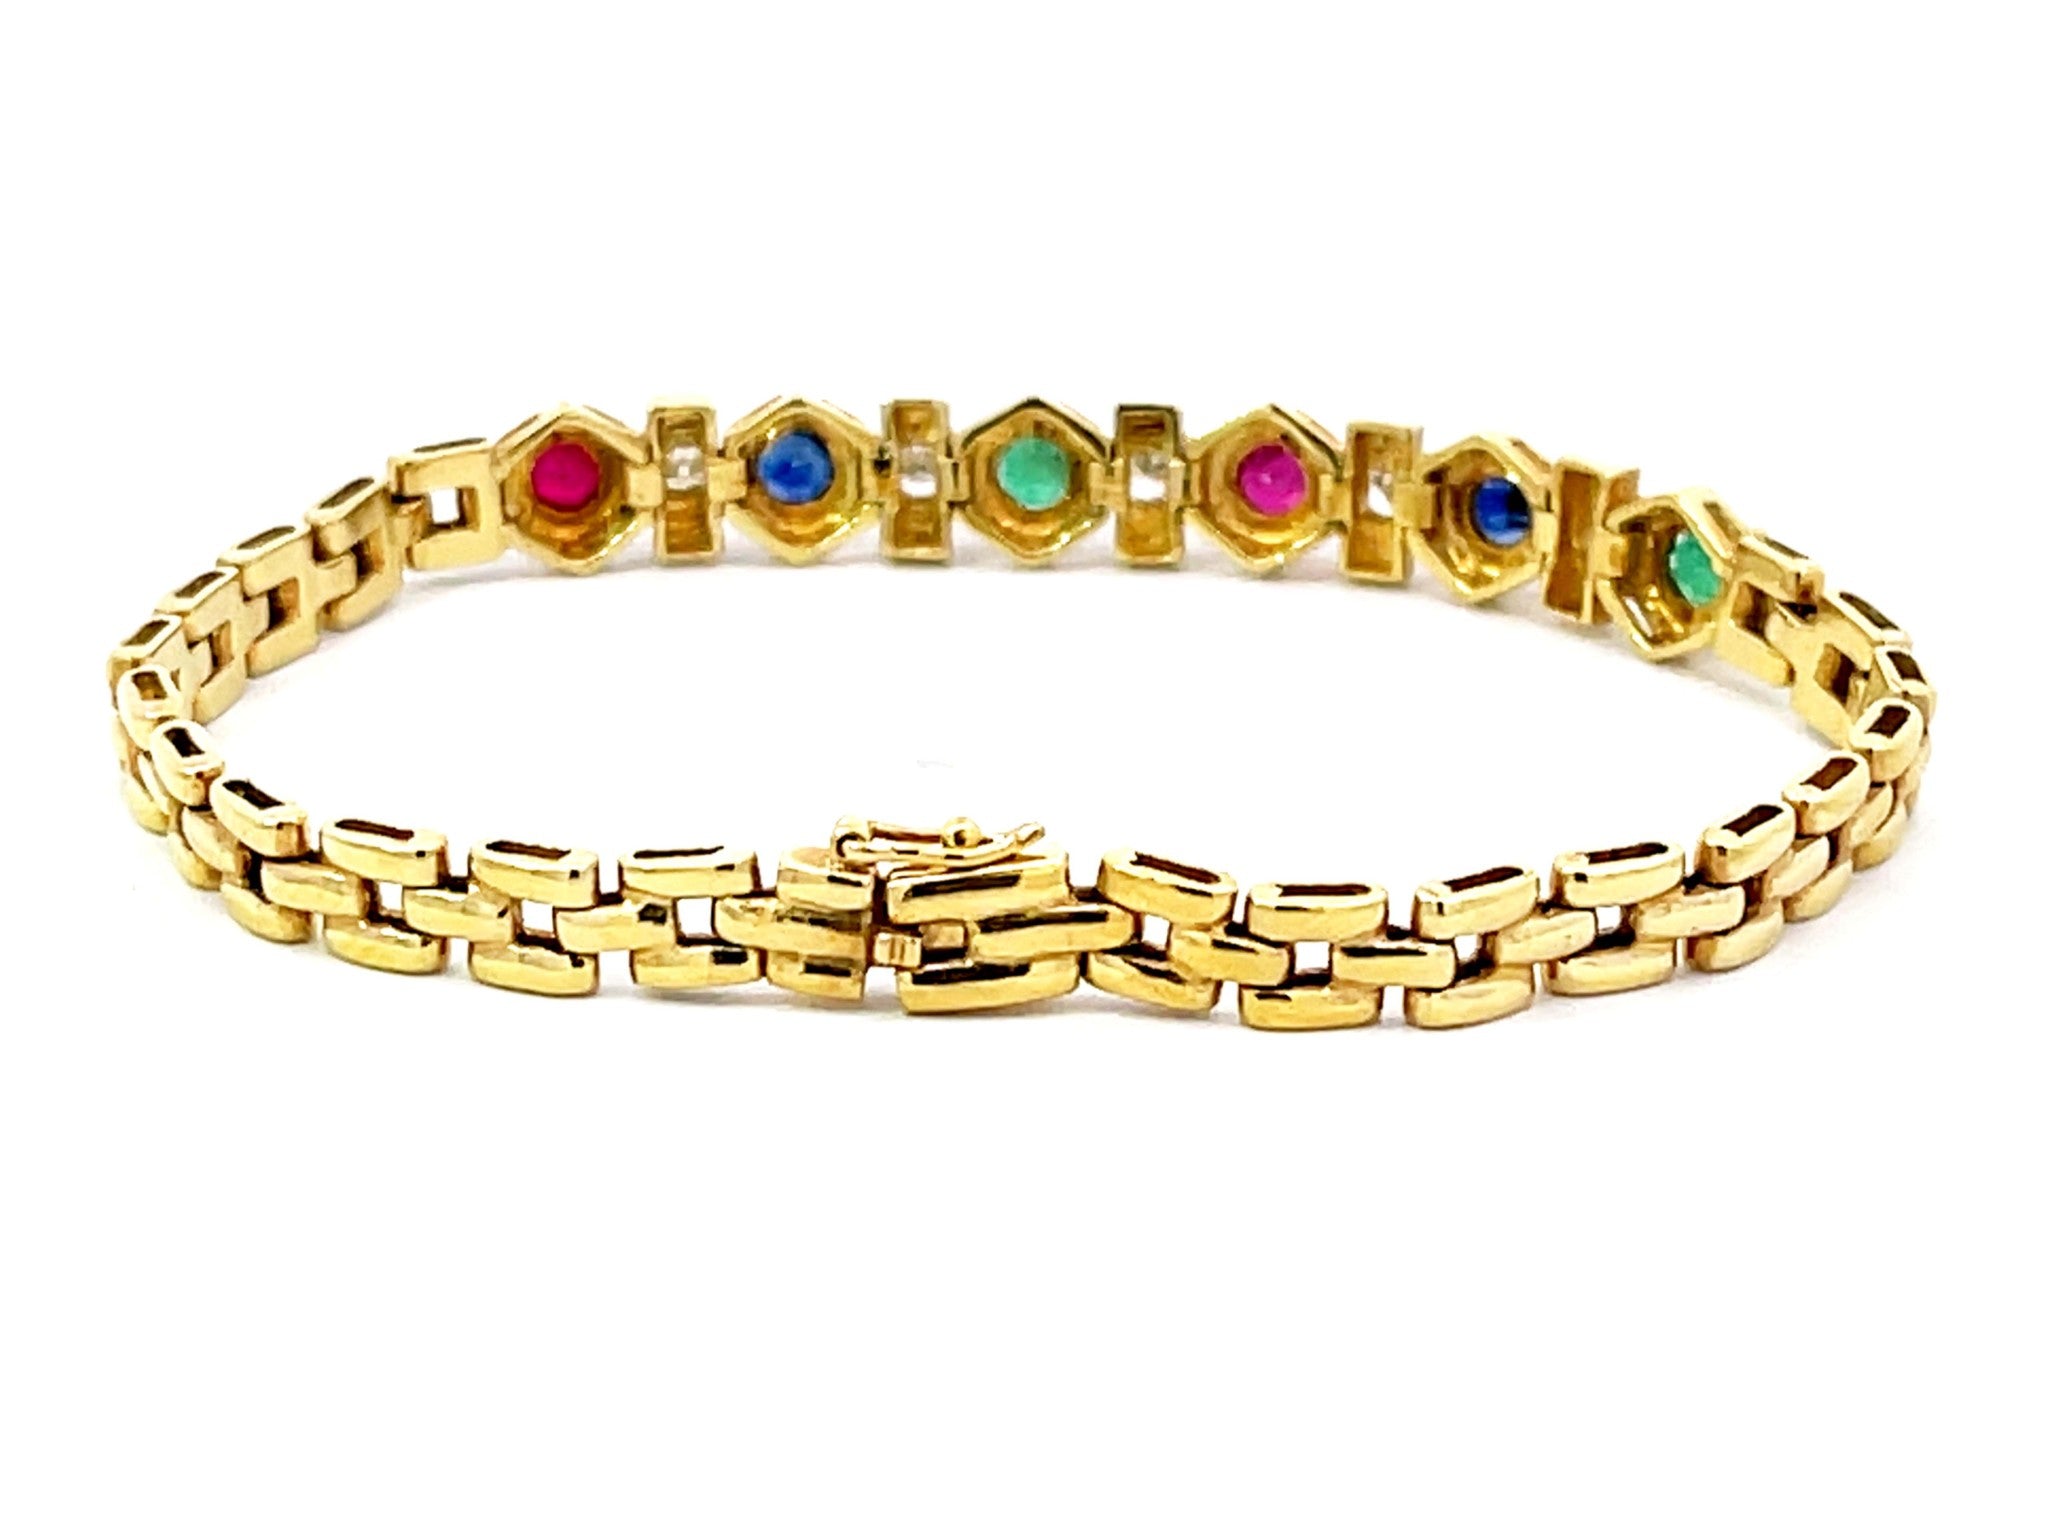 Emerald Sapphire Ruby and Diamond Bracelet in 18k Yellow Gold